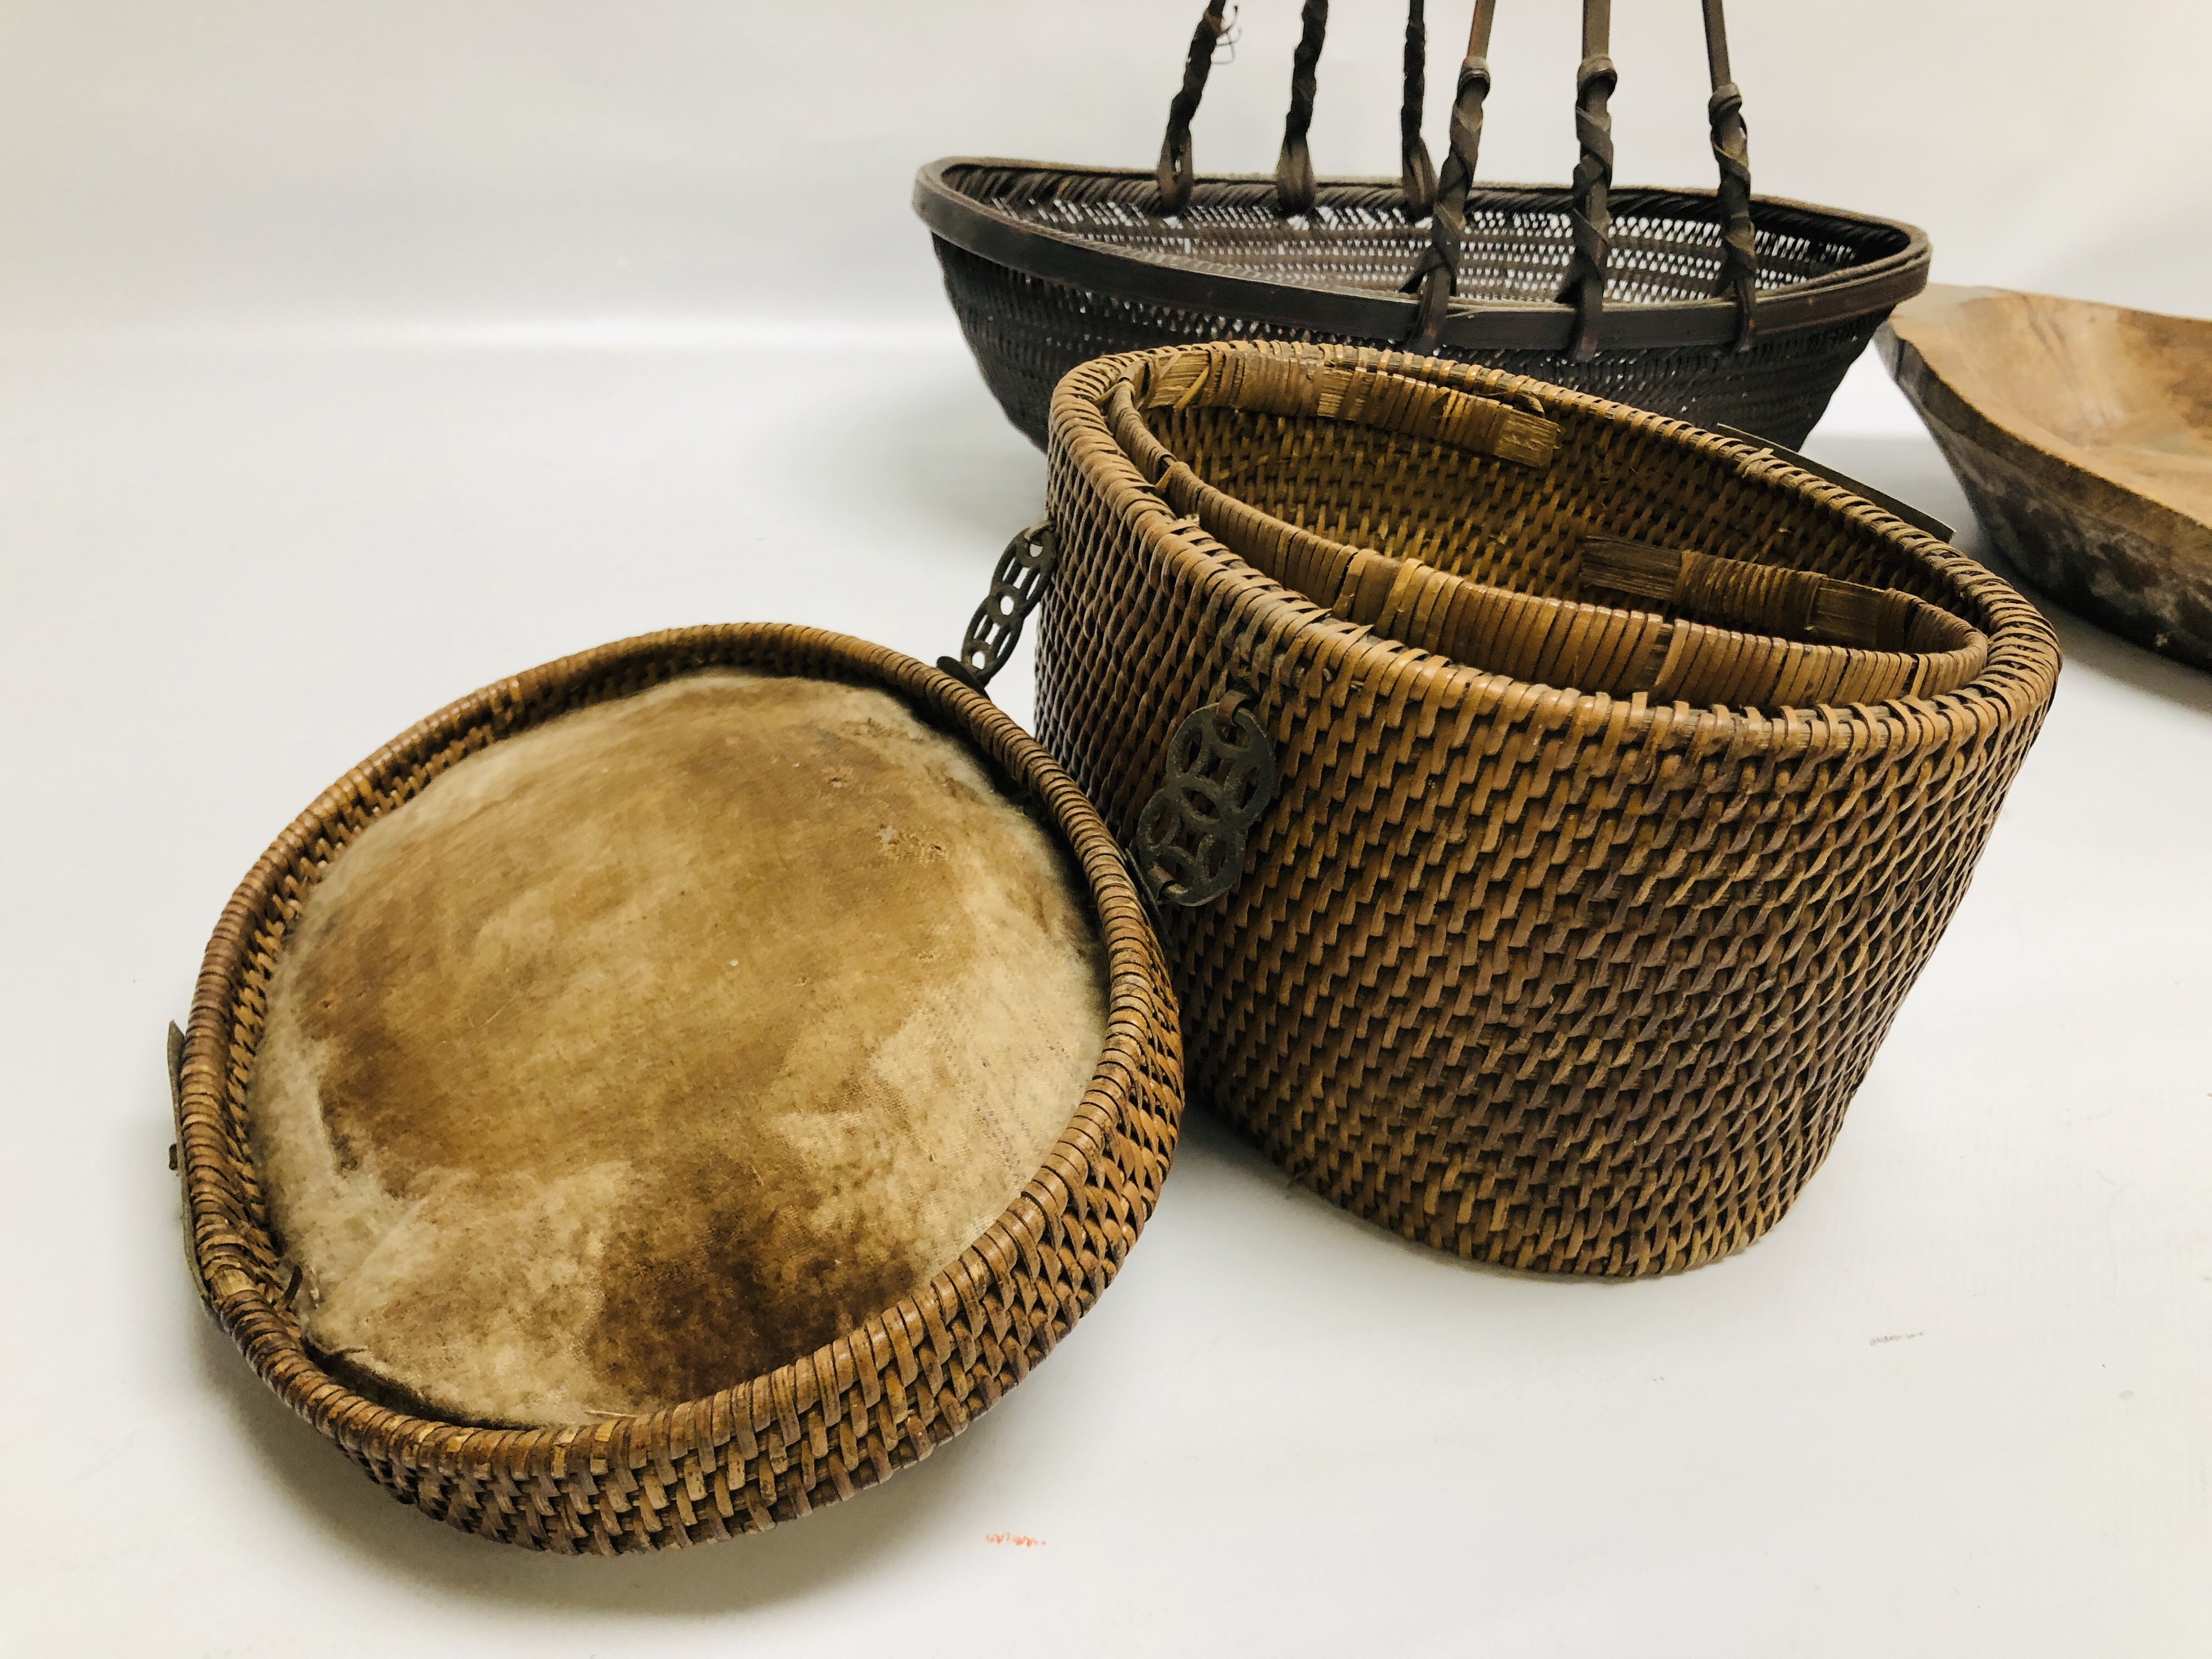 A VINTAGE WOVEN BAMBOO BASKET ALONG WITH A WOVEN WICKER TEA BASKET, METAL WORK HANDLES, - Image 8 of 9